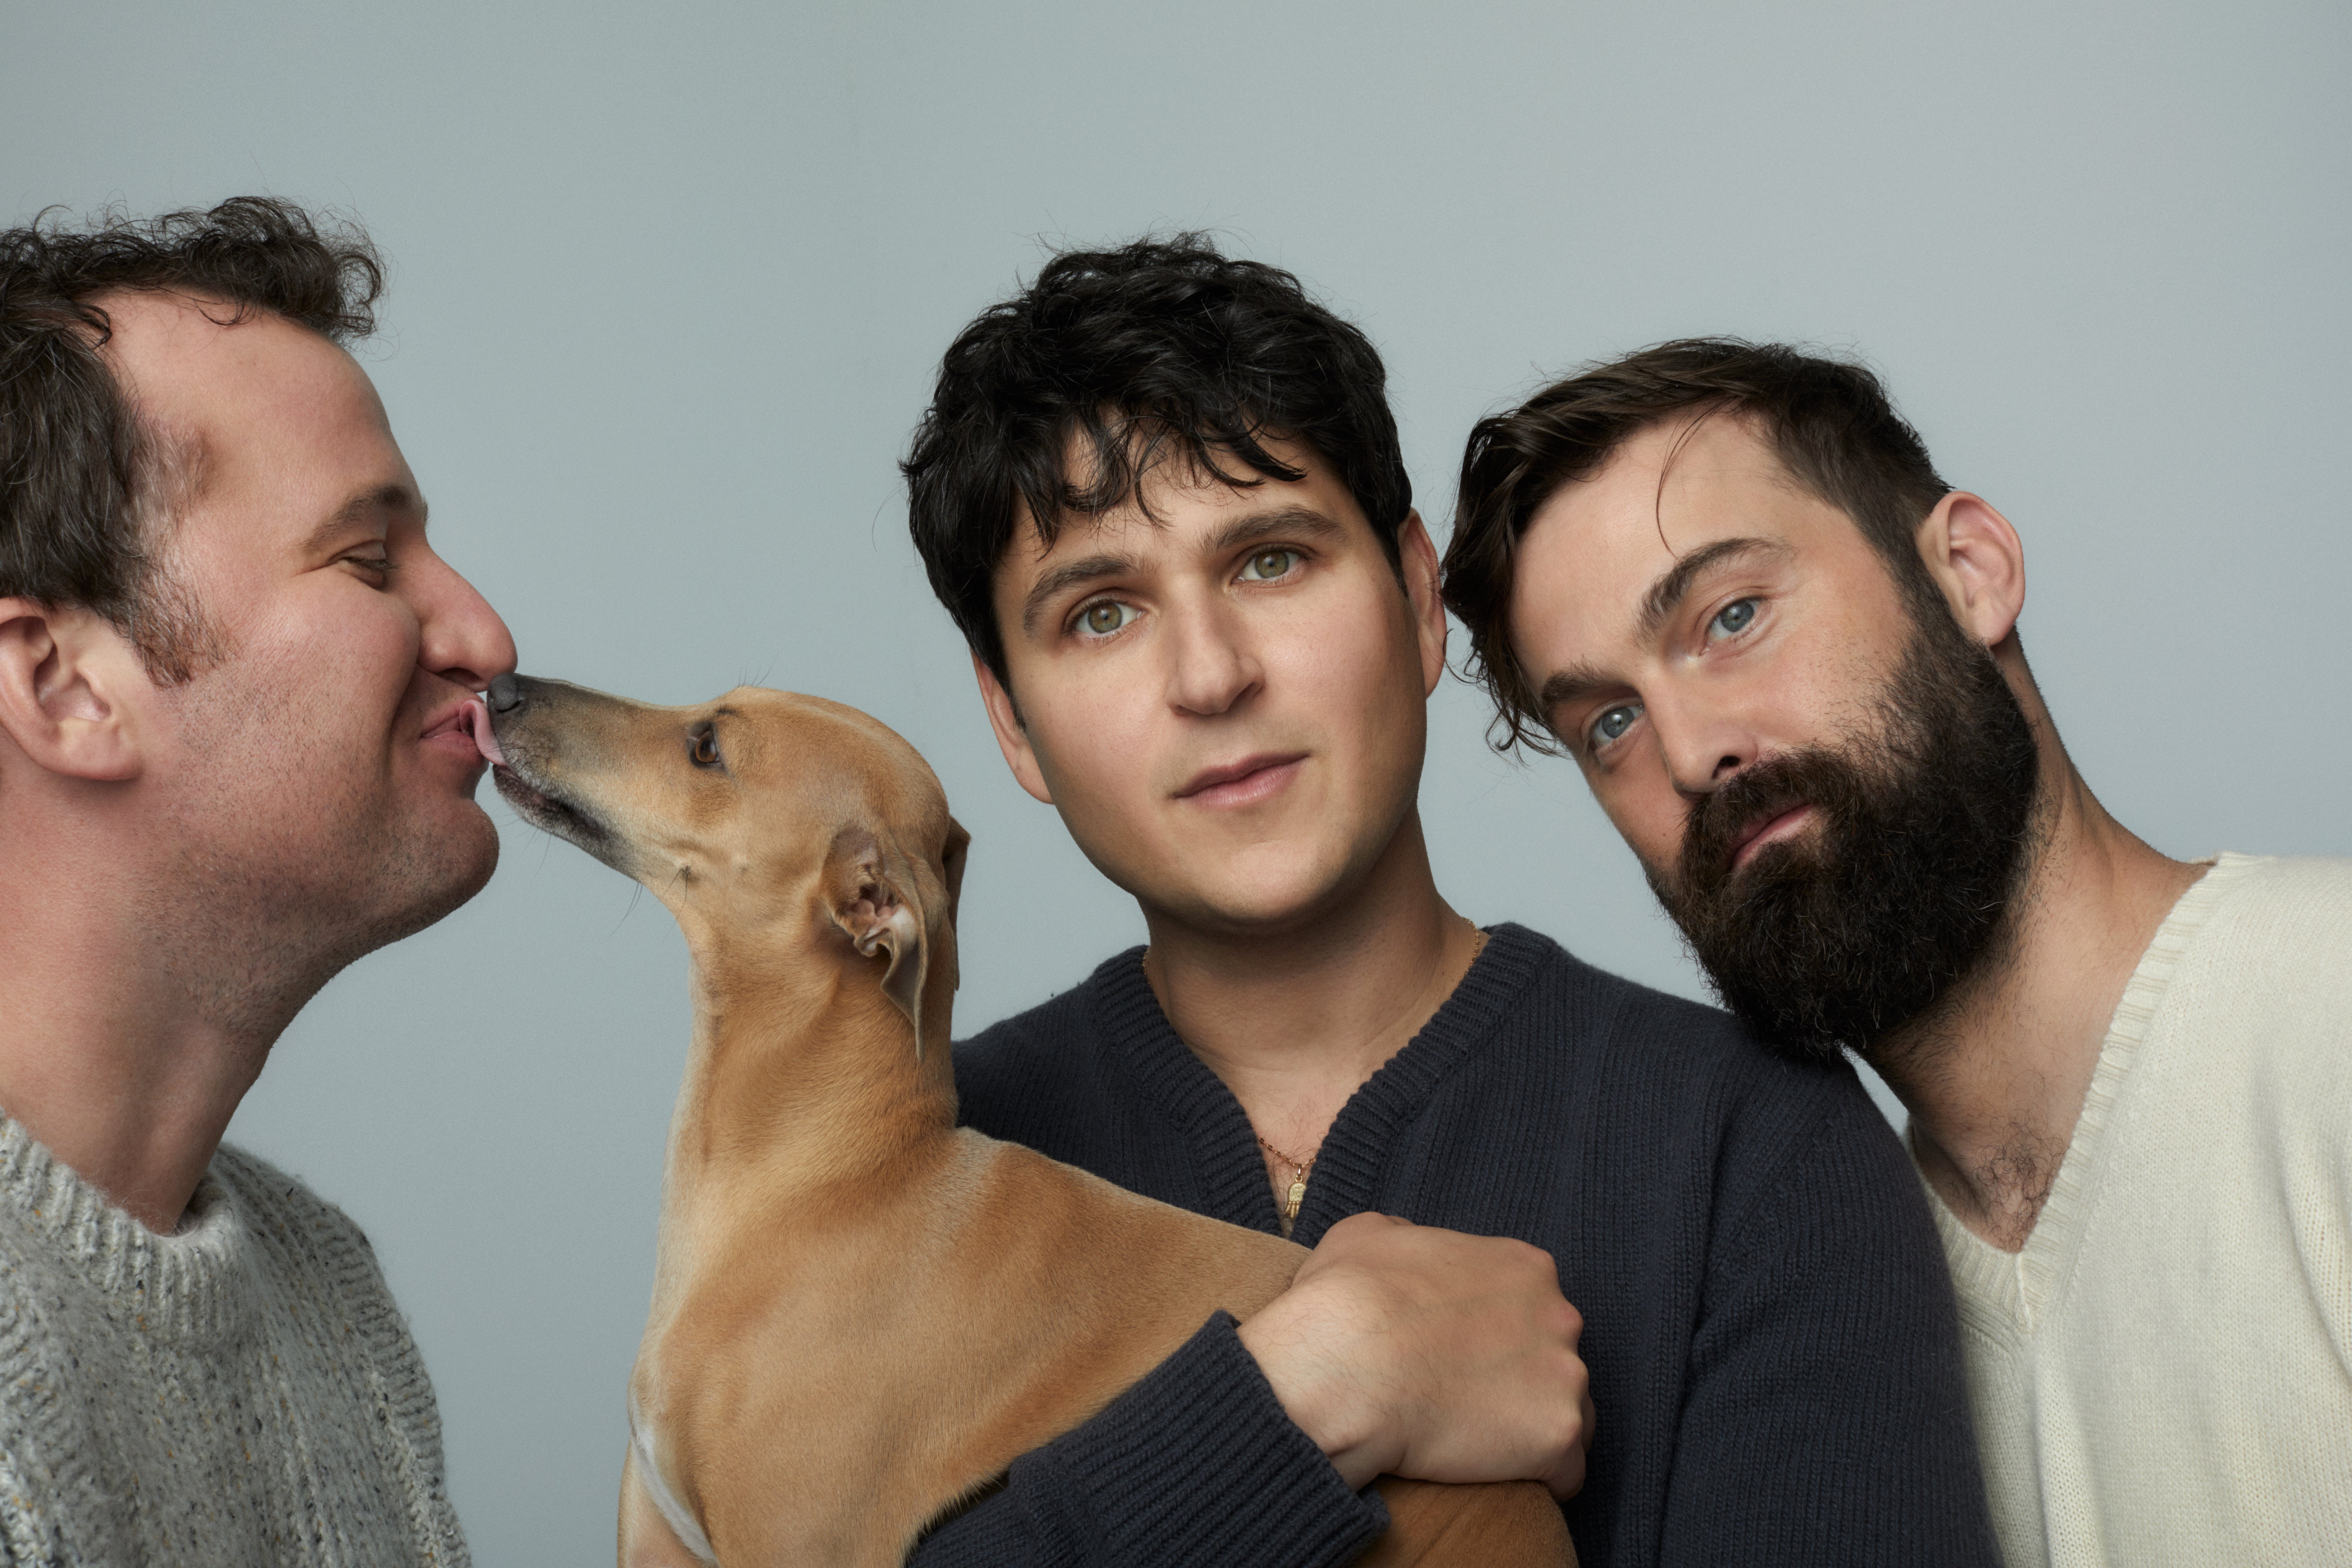 Vampire Weekend are back after a five-year hiatus with an album that puts a positive spin on world events